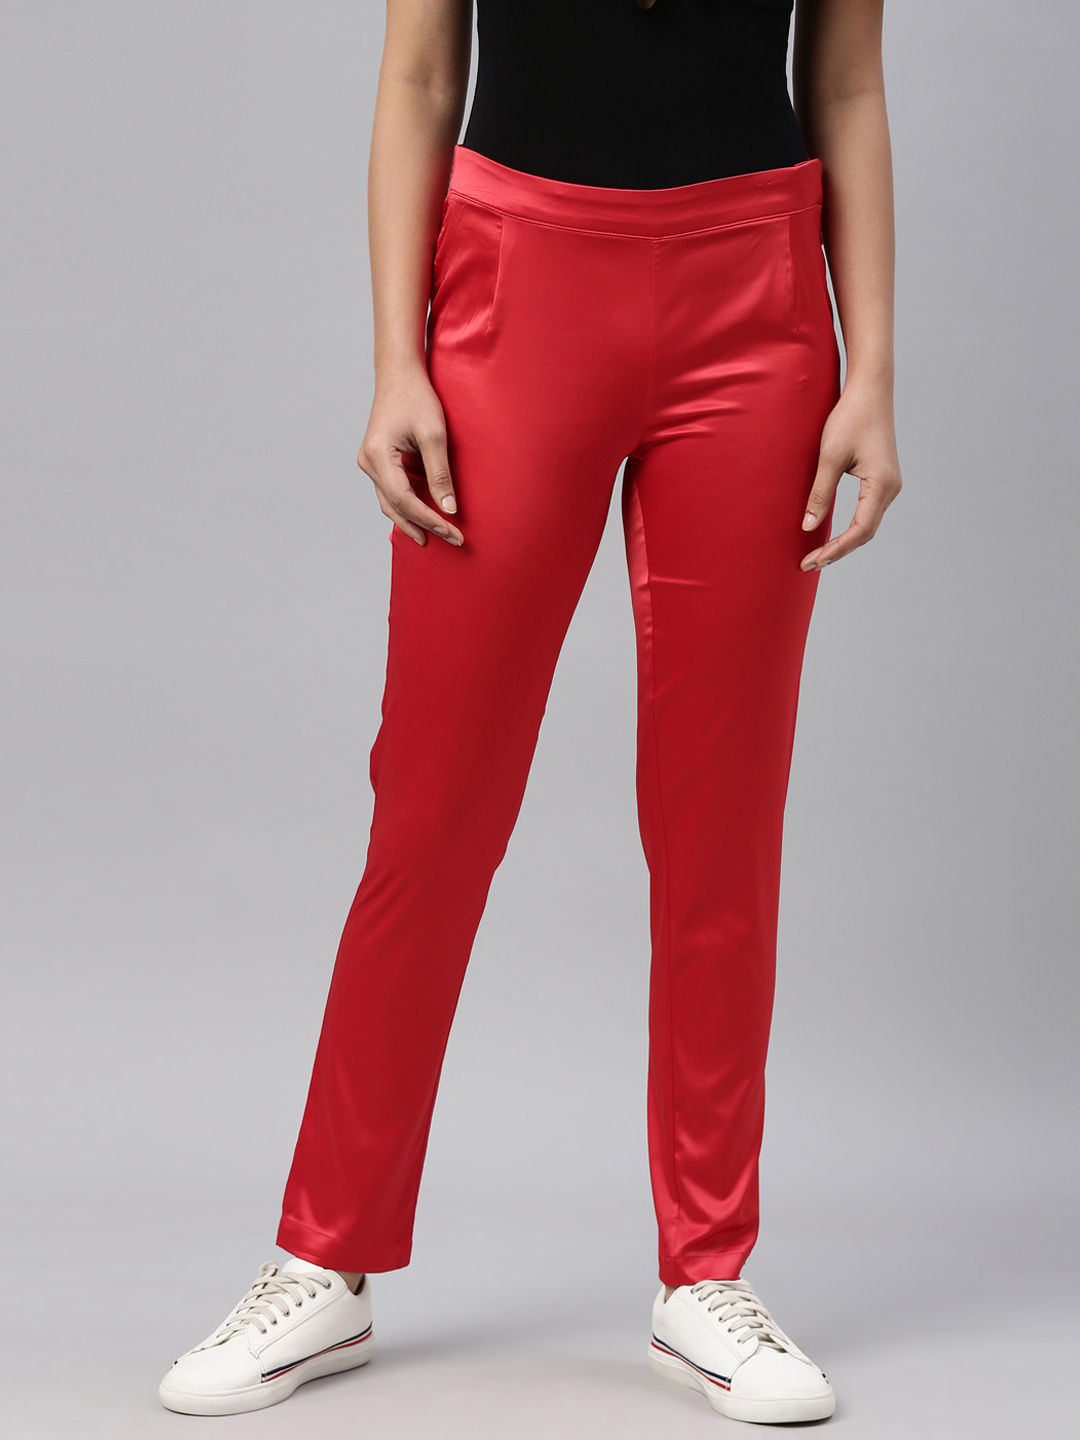 Buy Red Trousers  Pants for Women by DREAM  DZIRE Online  Ajiocom